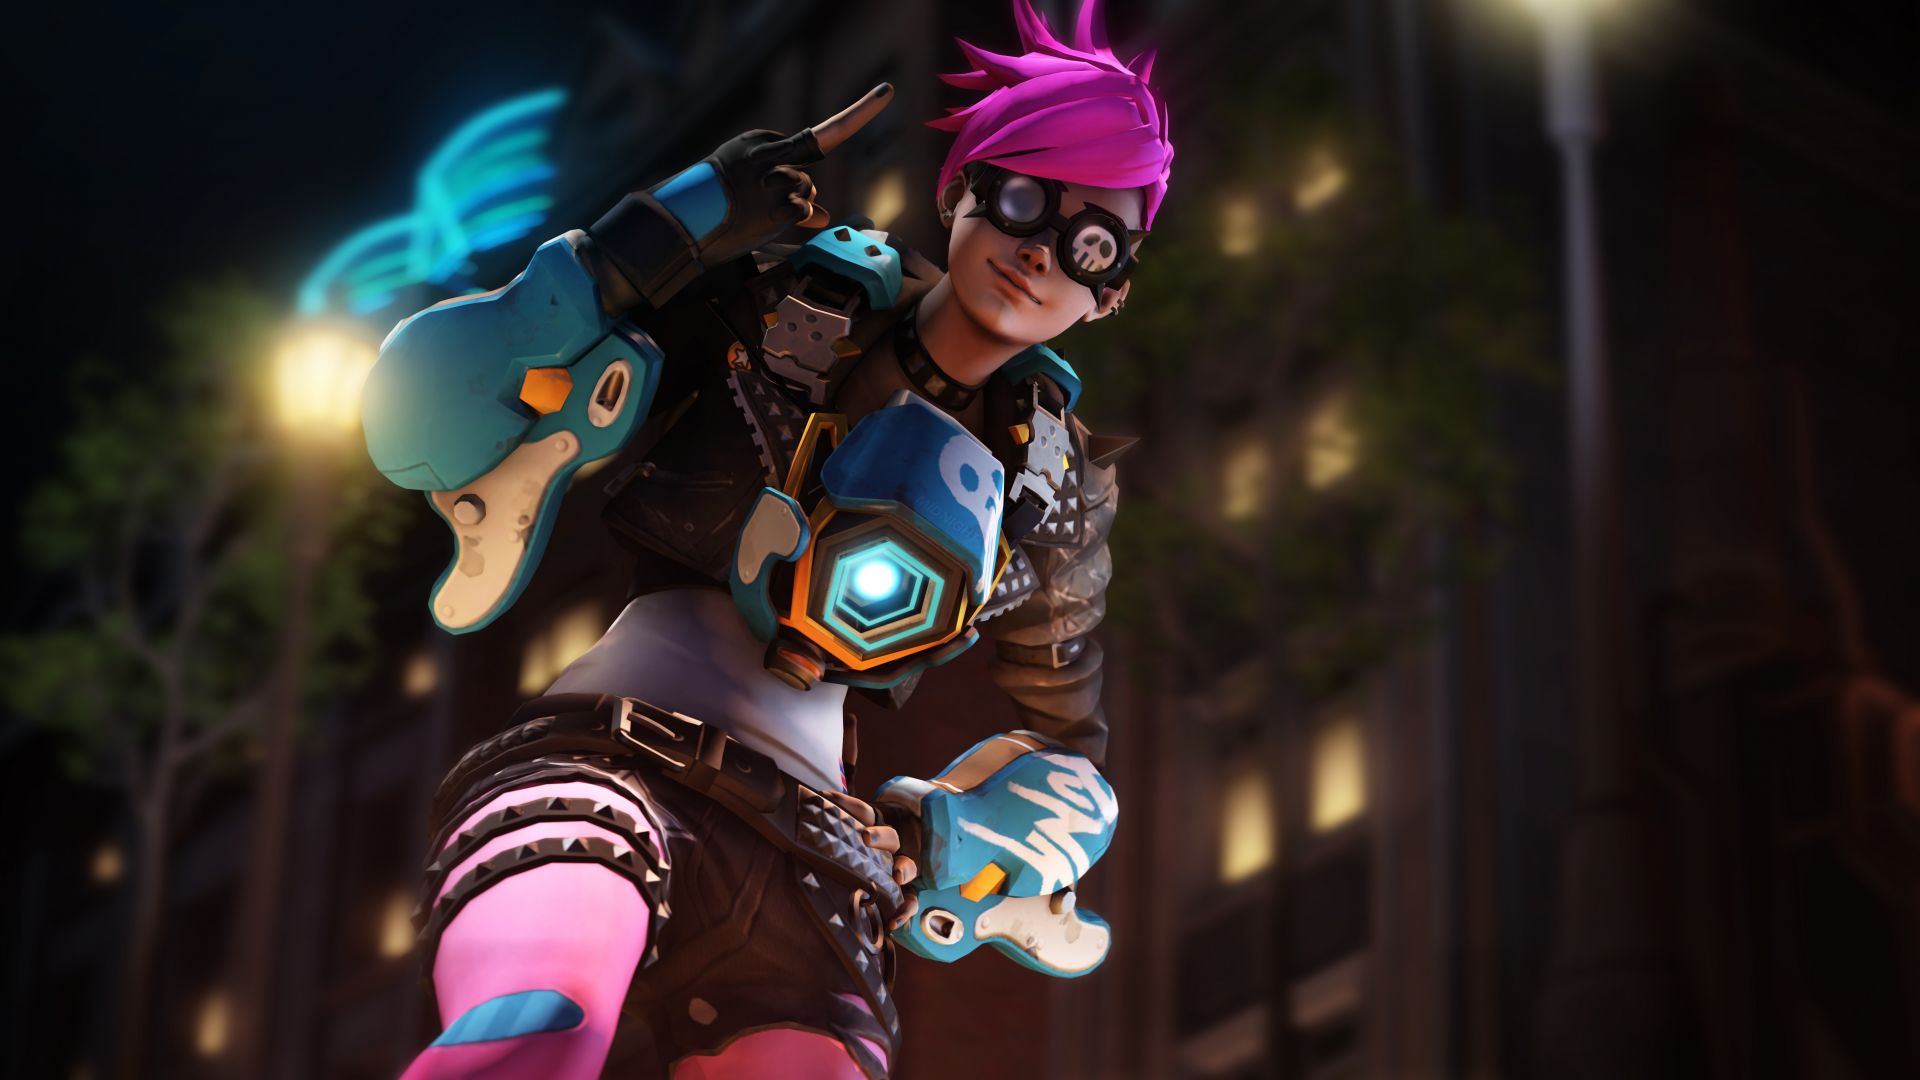 Wallpaper Tracer, pink hair, girl, overwatch, online game